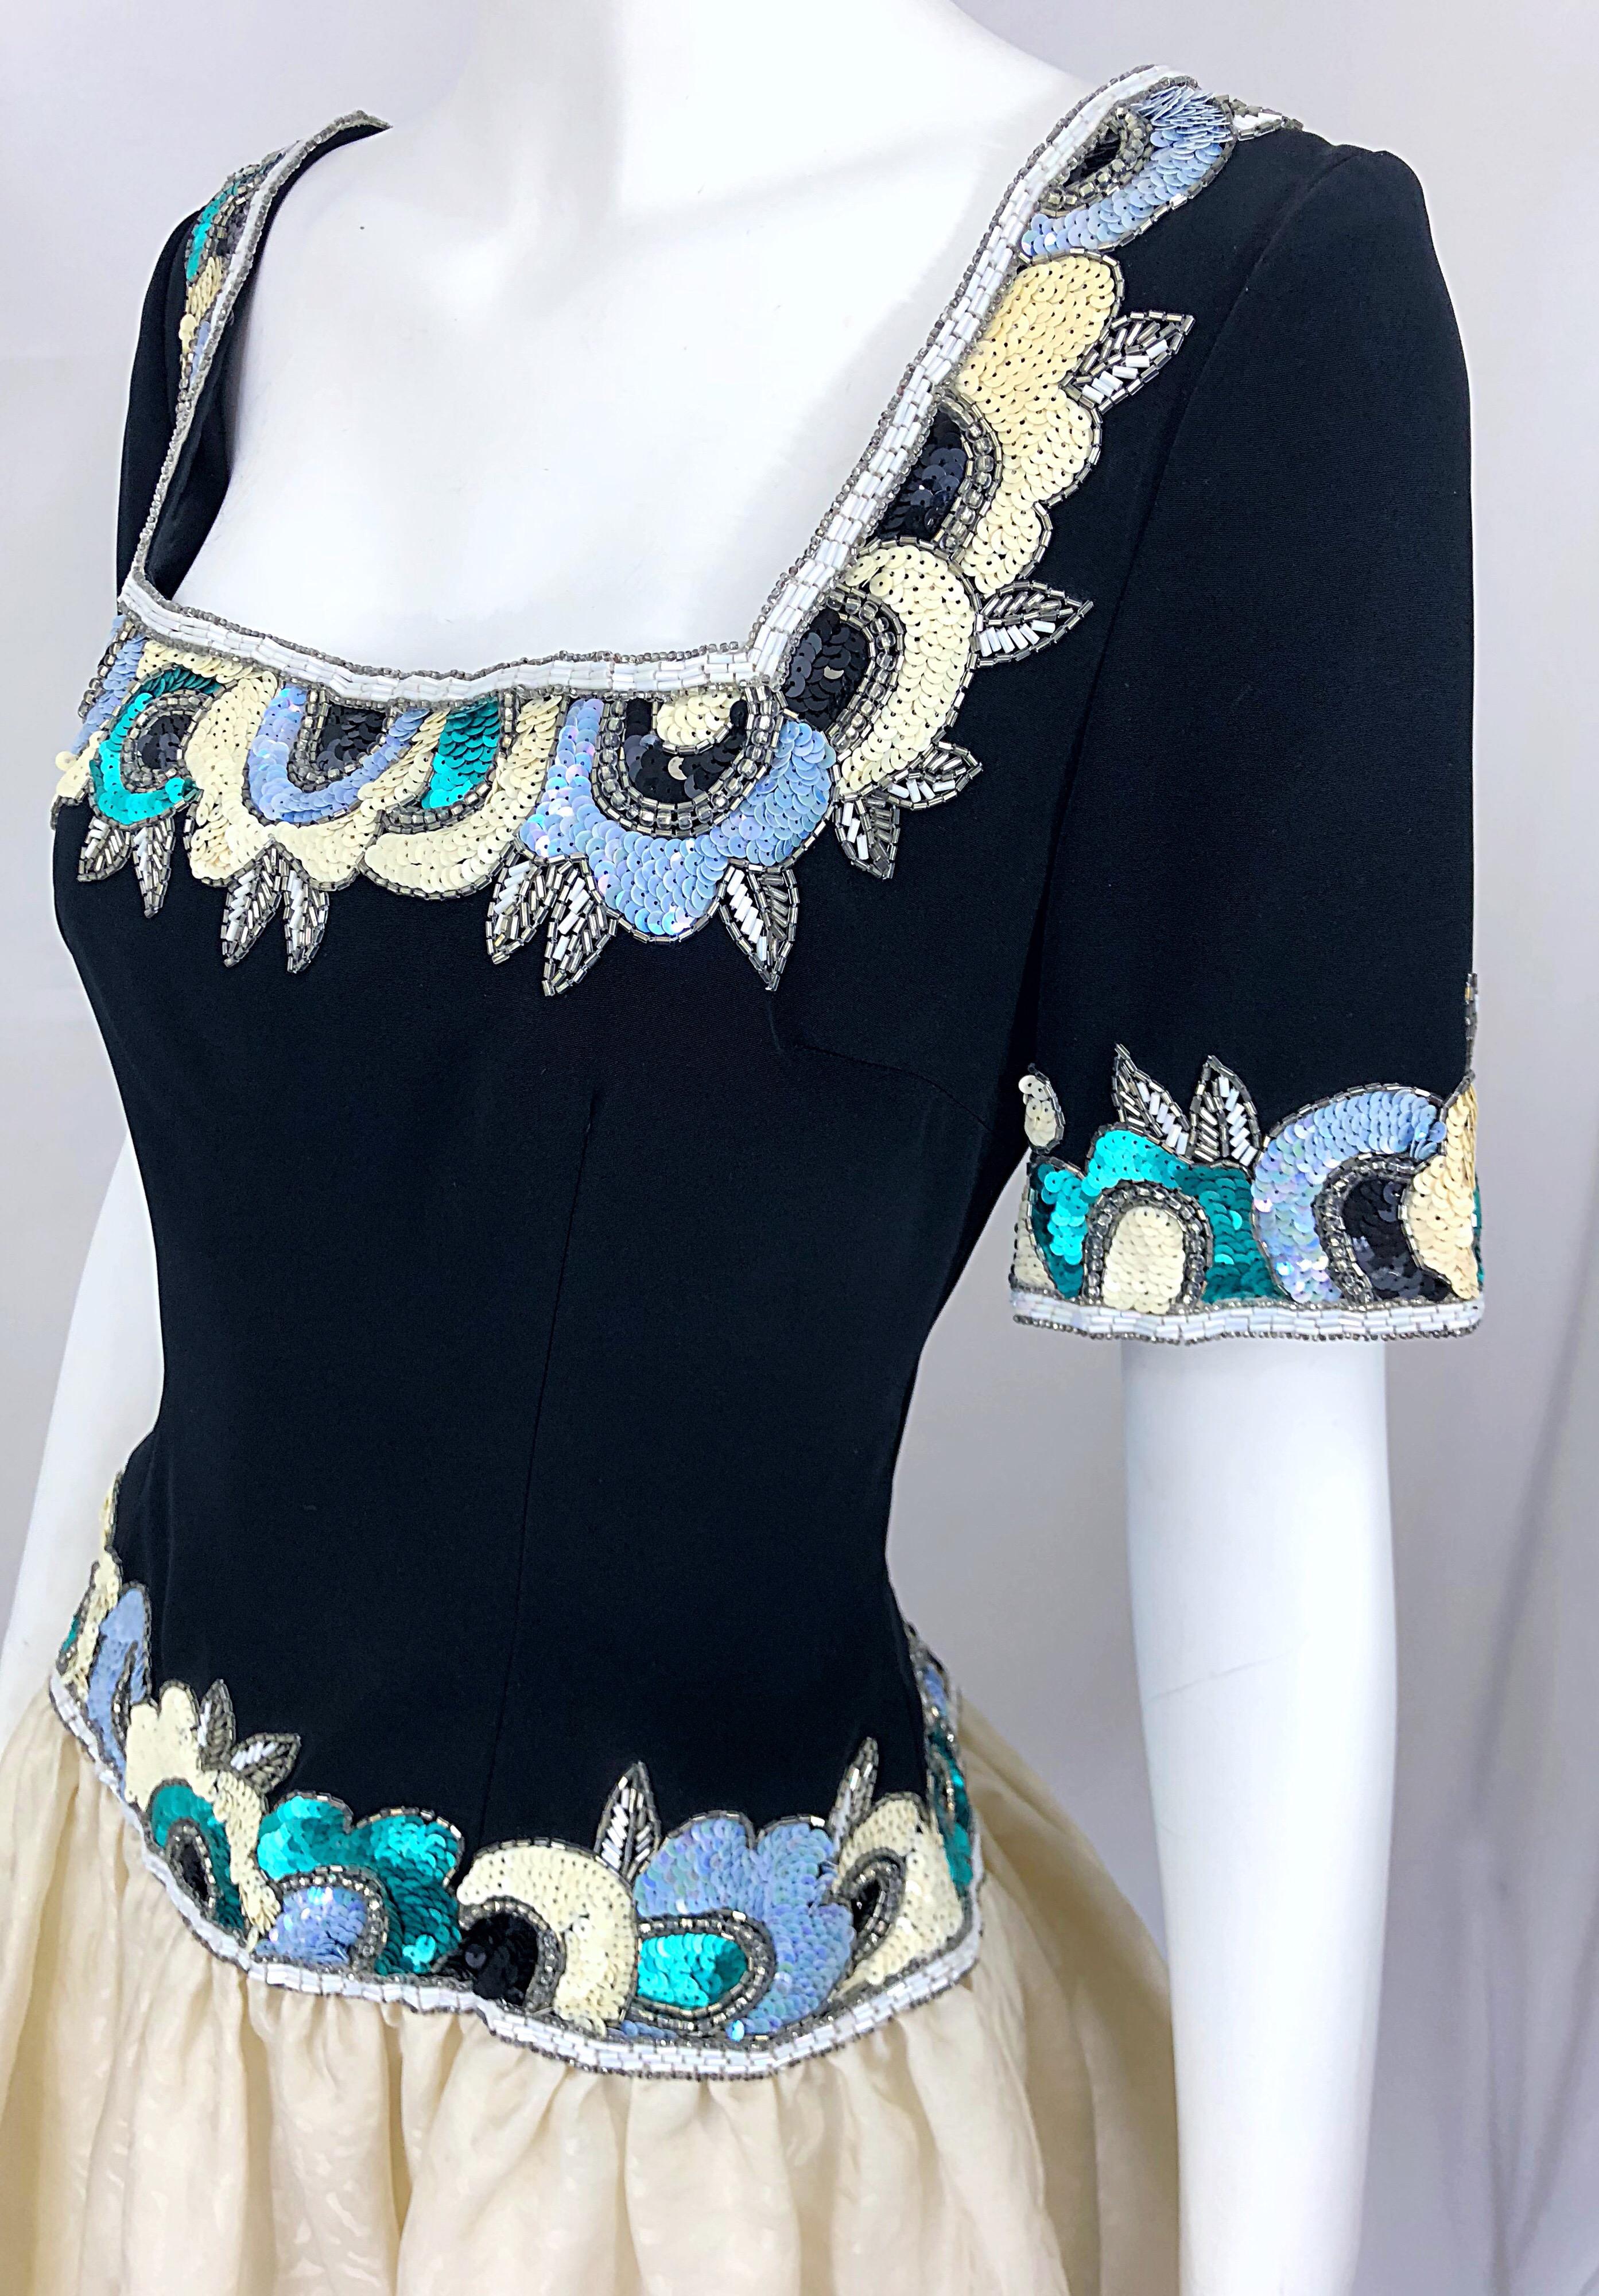 Vintage Bob Mackie 1990s Size 6 Black, White and Blue Silk Fit n' Flare Dress In Excellent Condition For Sale In San Diego, CA